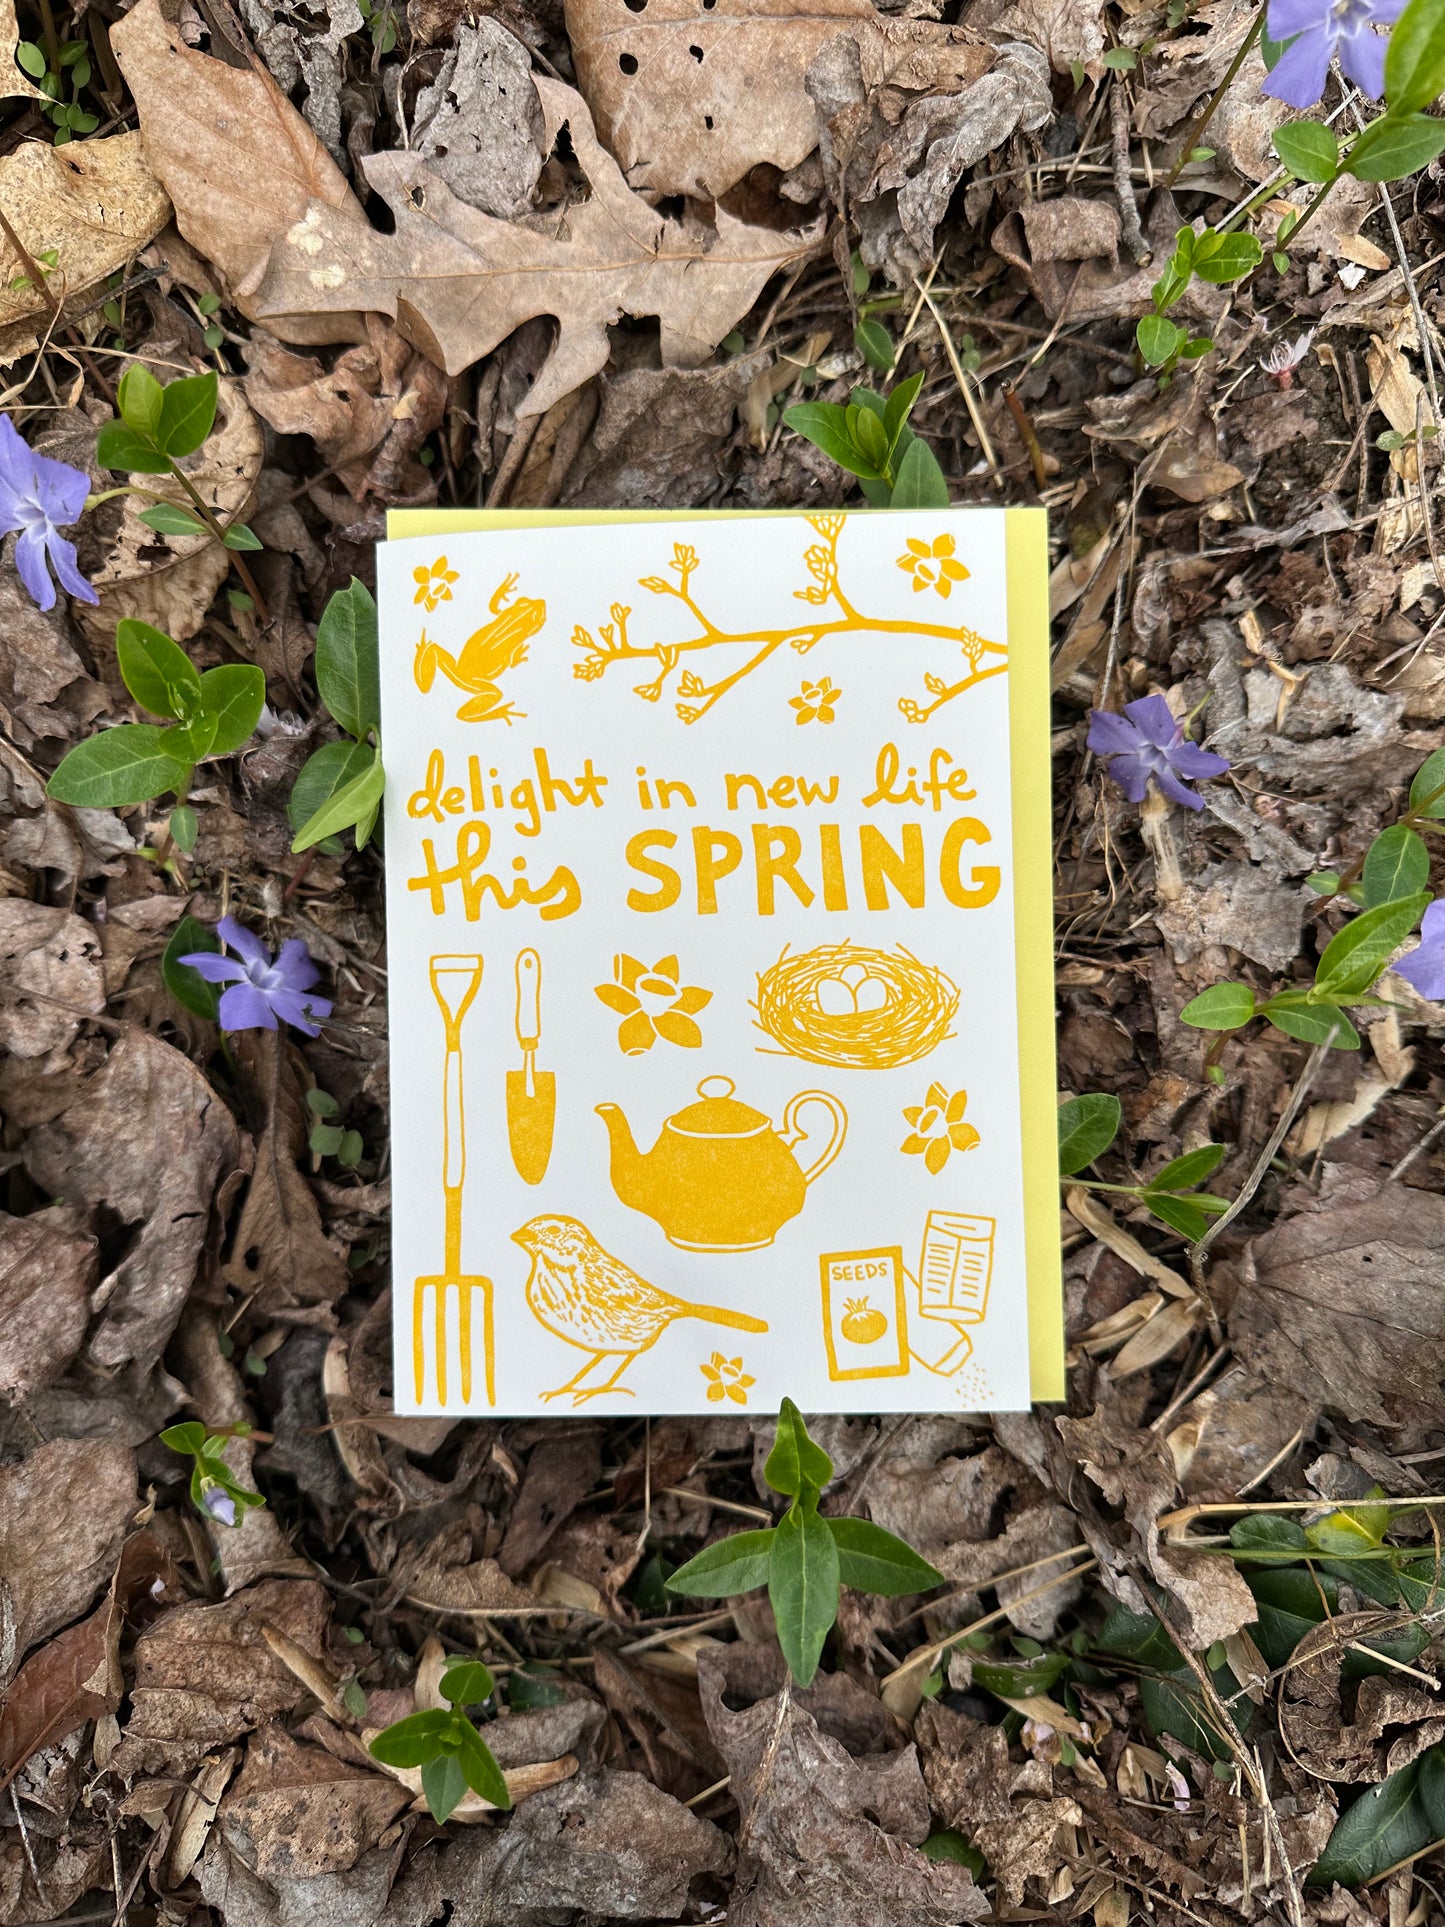 Celebrate SPRING with this festive greeting card! This cheerful card features all the iconic images of the fall spring: daffodils, spring peeper frogs, forsythia branch, gardening tools, vegetable seeds, teapot, birds nest with eggs, and a sparrow. Hand-drawn images and typography are letterpress-printed in deep golden ink.  Card is shown outside in a bed of periwinkle.